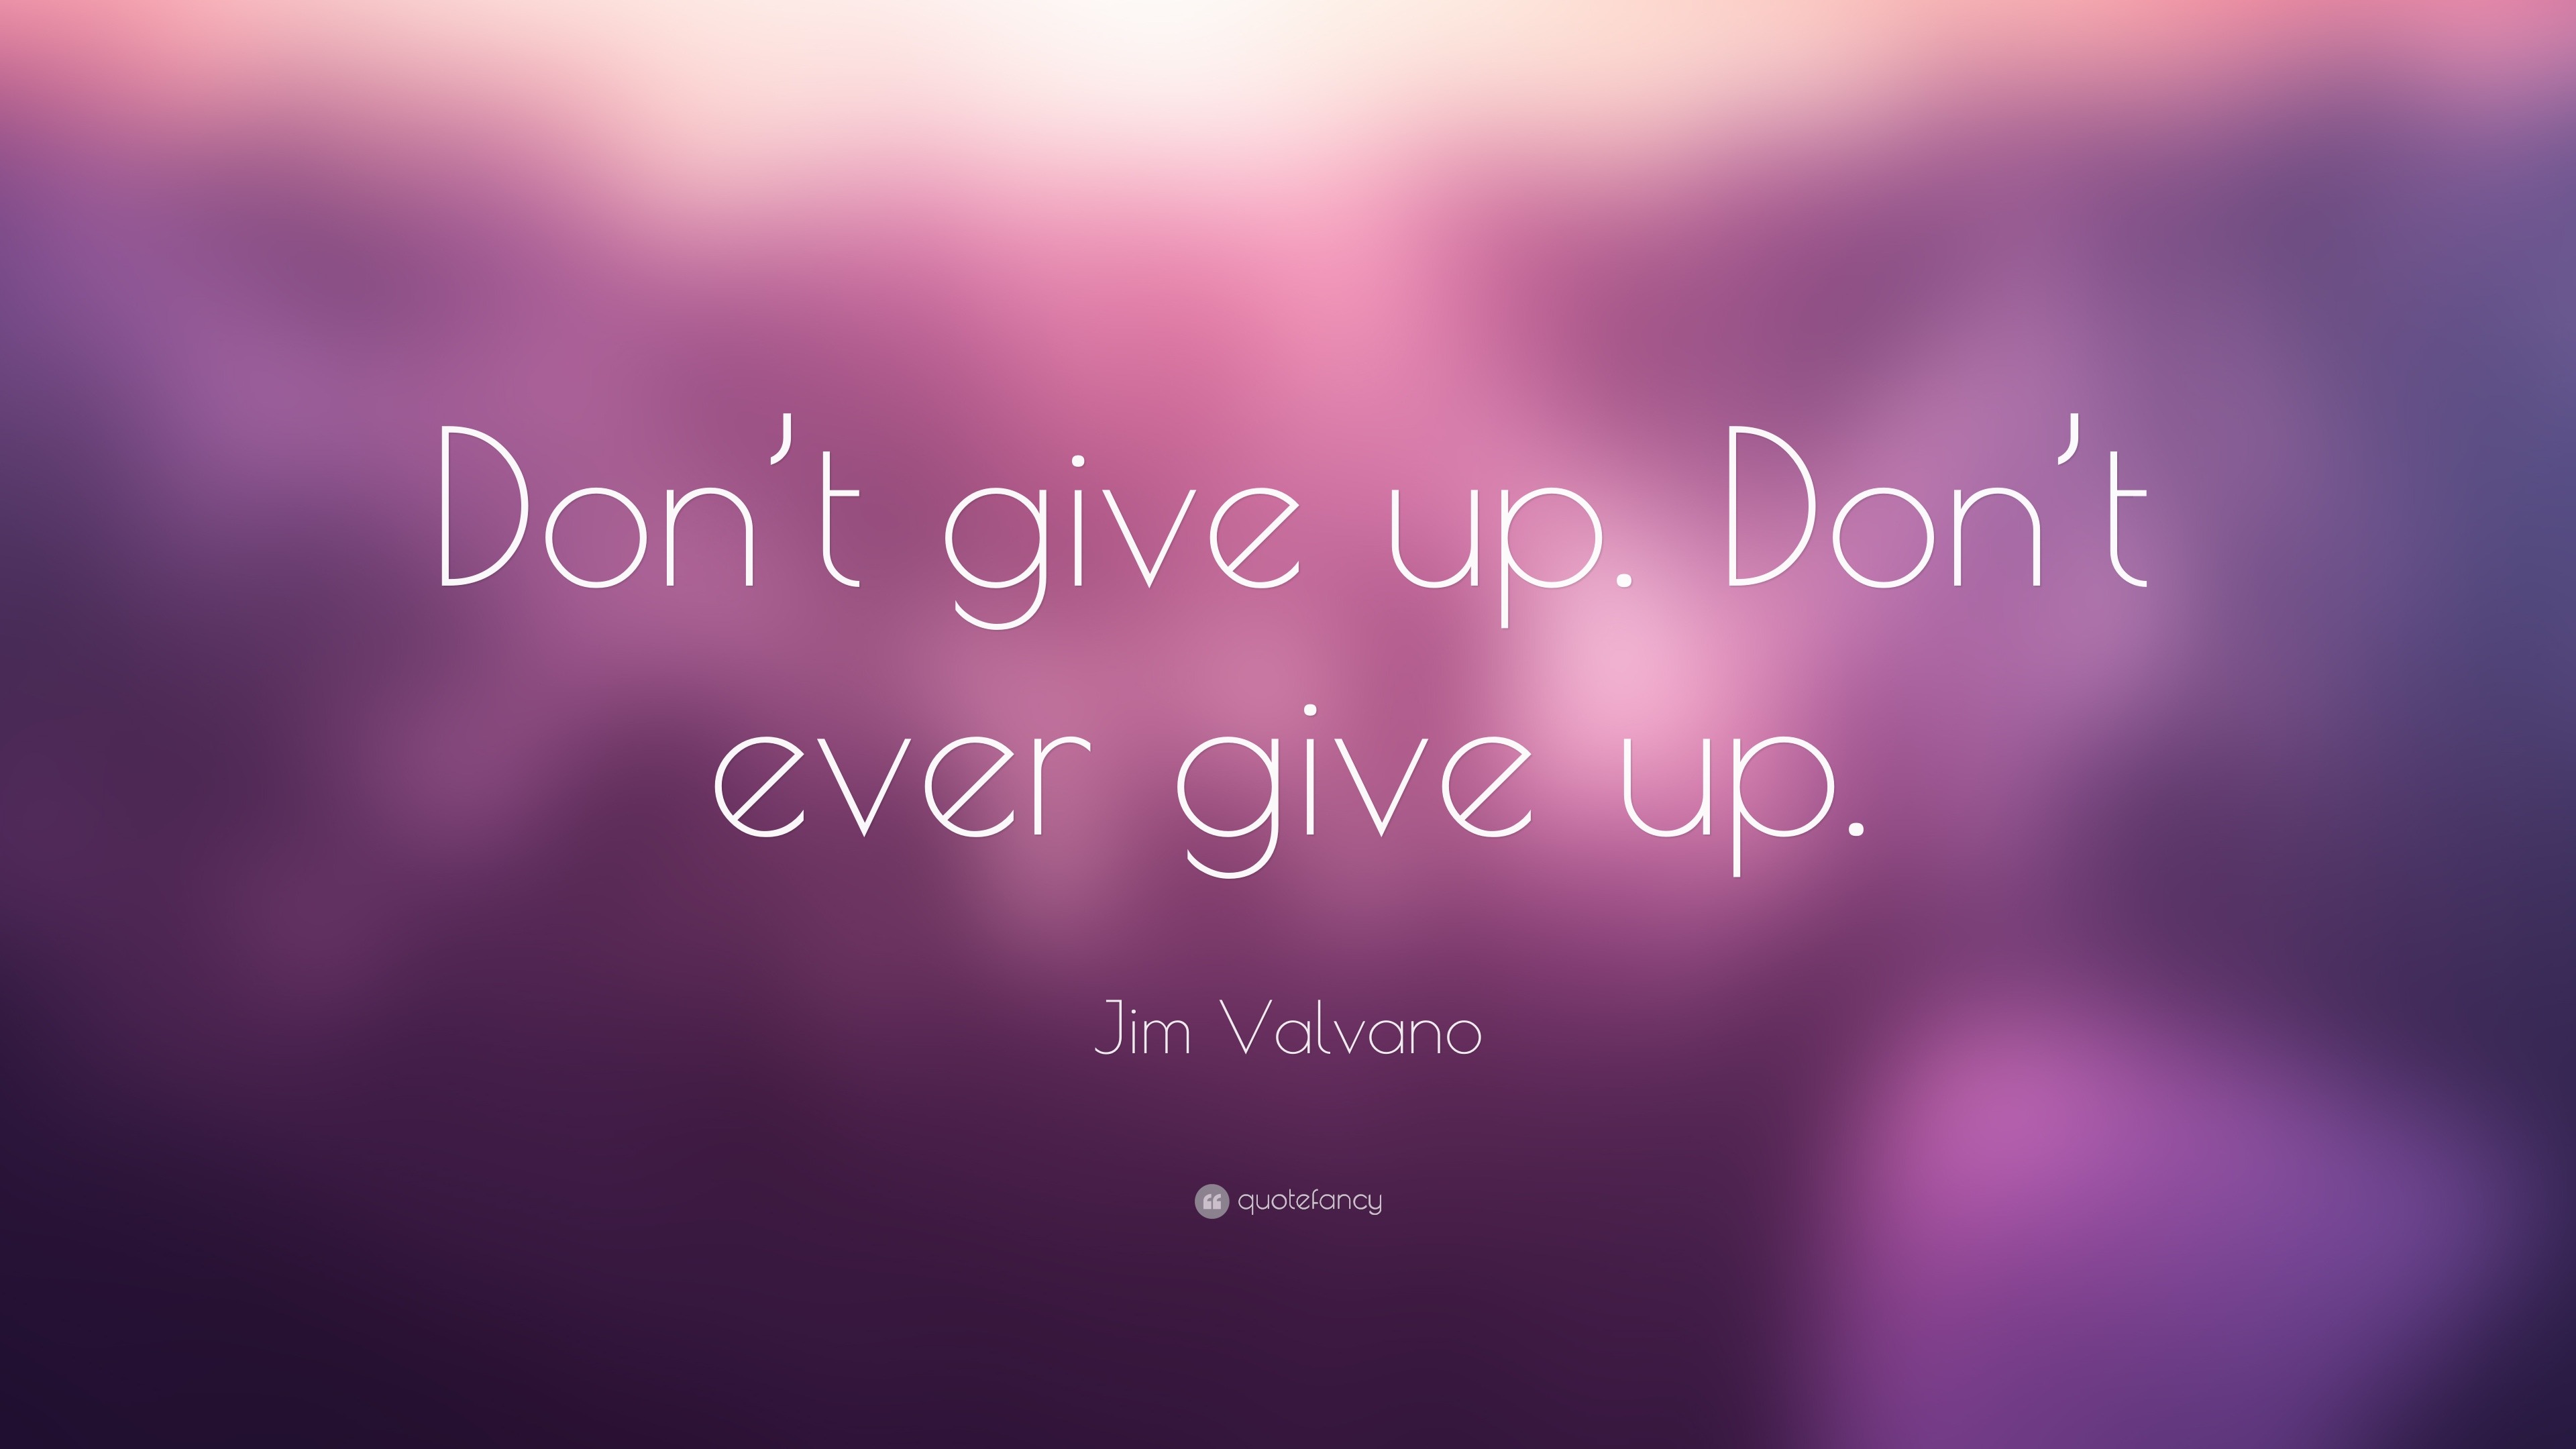 Jim Valvano Quote: “Don’t give up. Don’t ever give up.”